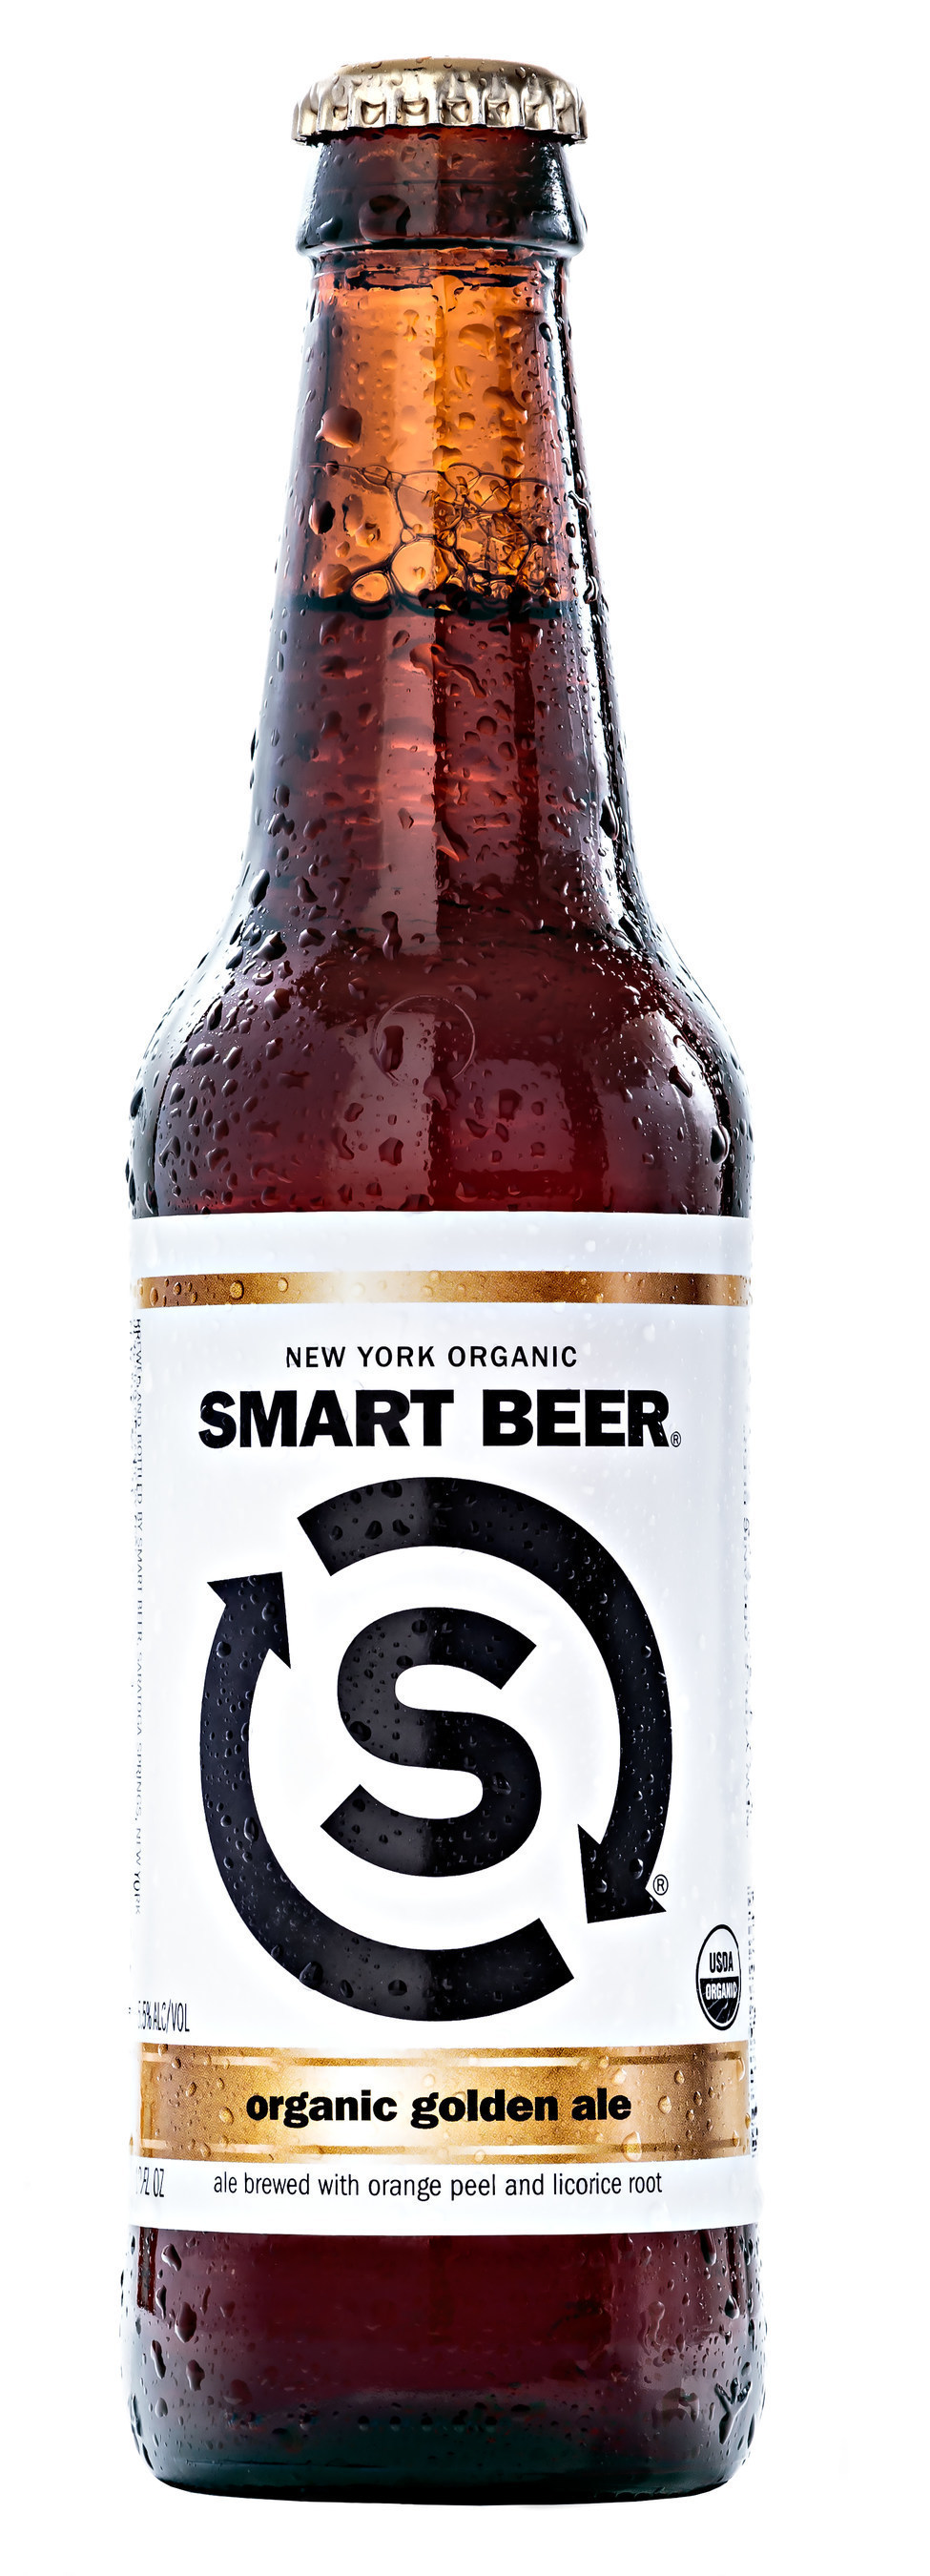 Smart Beer is New York's first organic beer. It's crafted with pure, certified organic ingredients and has a refreshing taste created for consumers who want to enjoy life with a beer they can feel good about drinking.